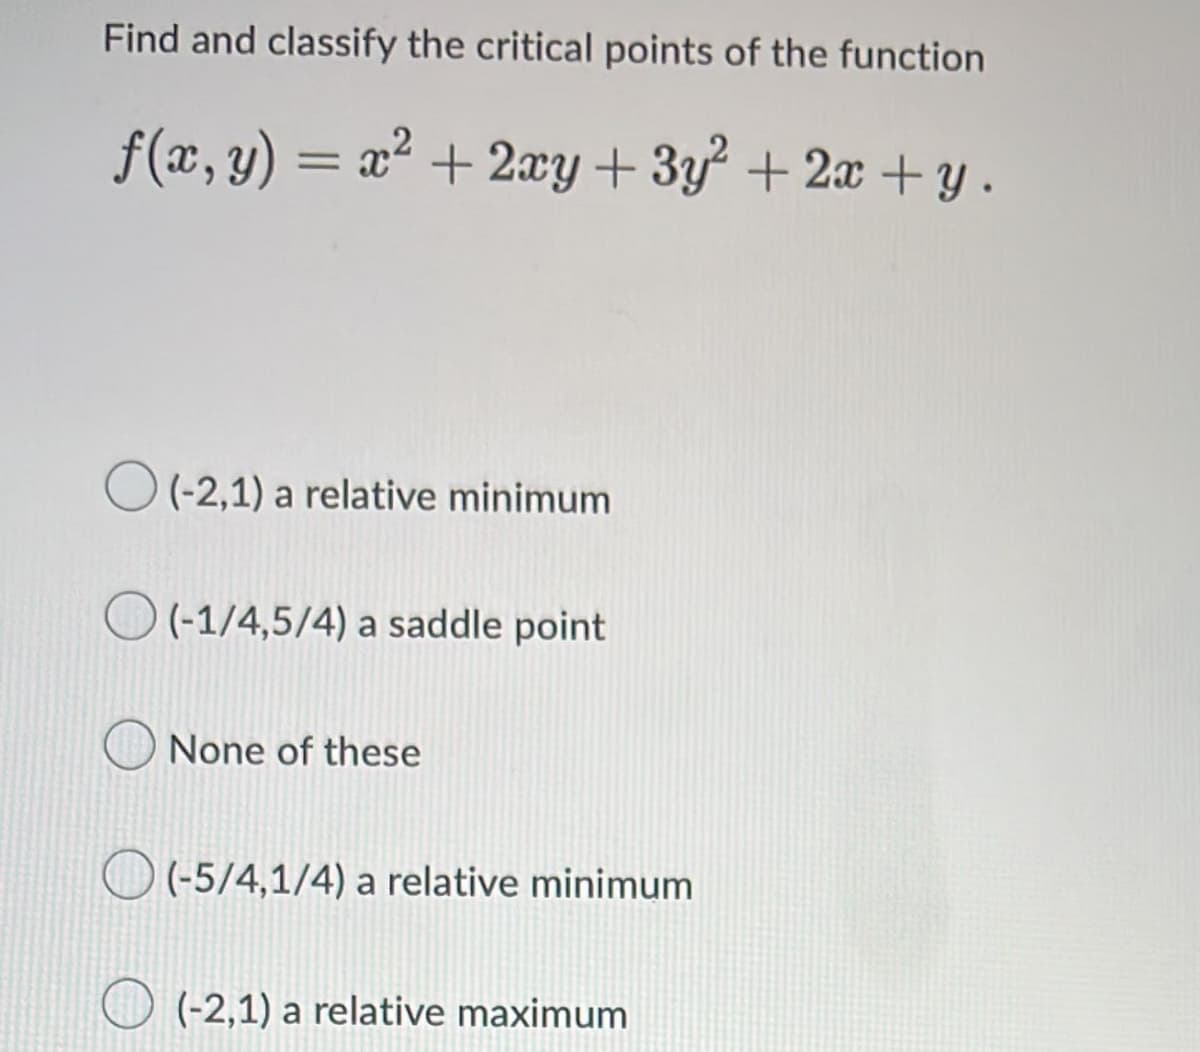 Find and classify the critical points of the function
f(x, y) = x² + 2xy + 3y + 2x + y .
%3D
O (-2,1) a relative minimum
O (-1/4,5/4) a saddle point
None of these
O (5/4,1/4) a relative minimum
O (-2,1) a relative maximum
